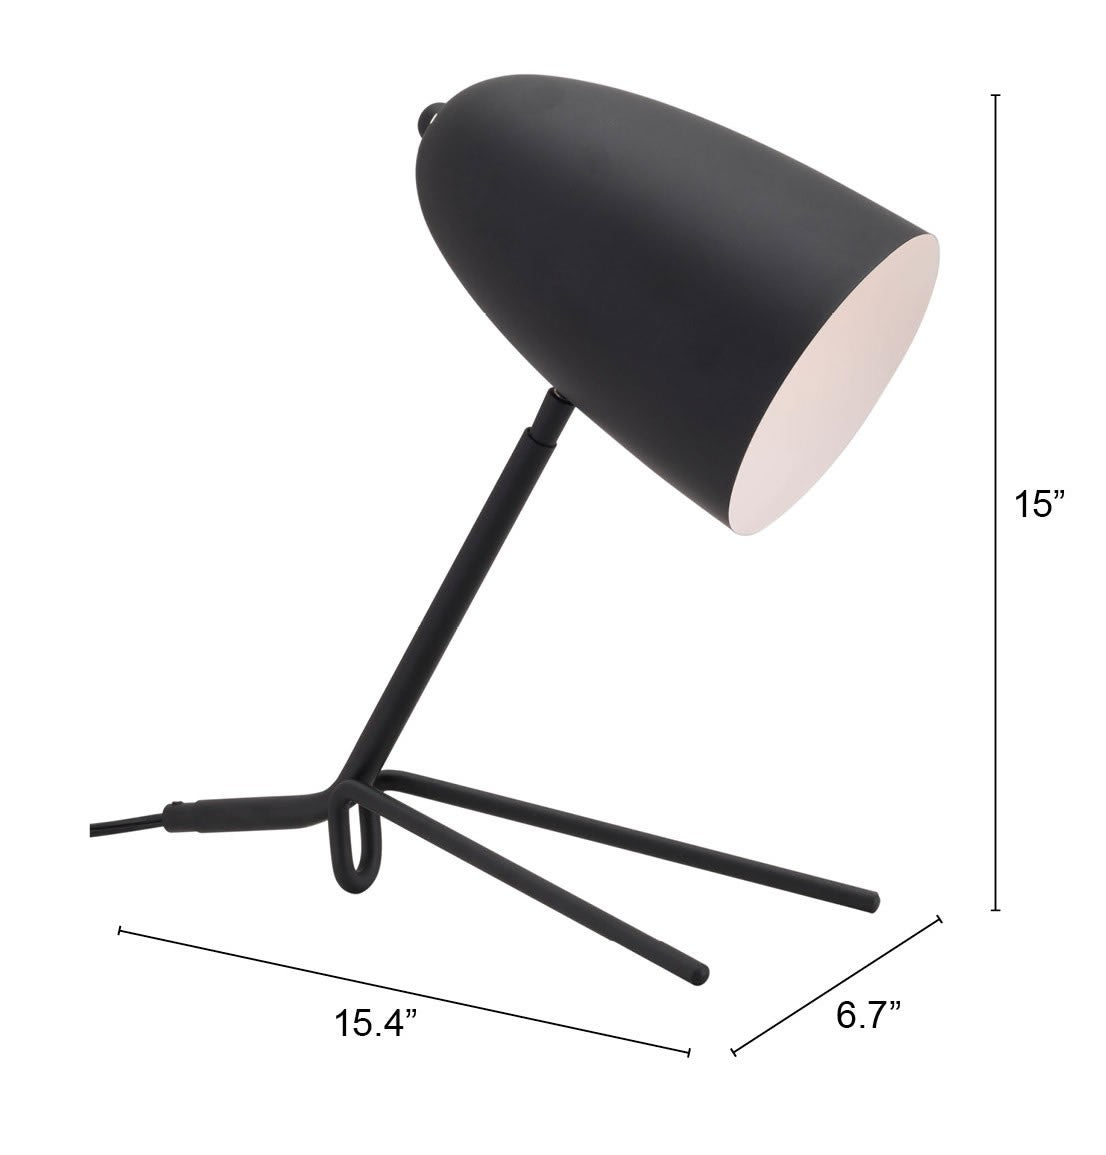 38" Black Metal Bedside Table Lamp With Black Dome Shade